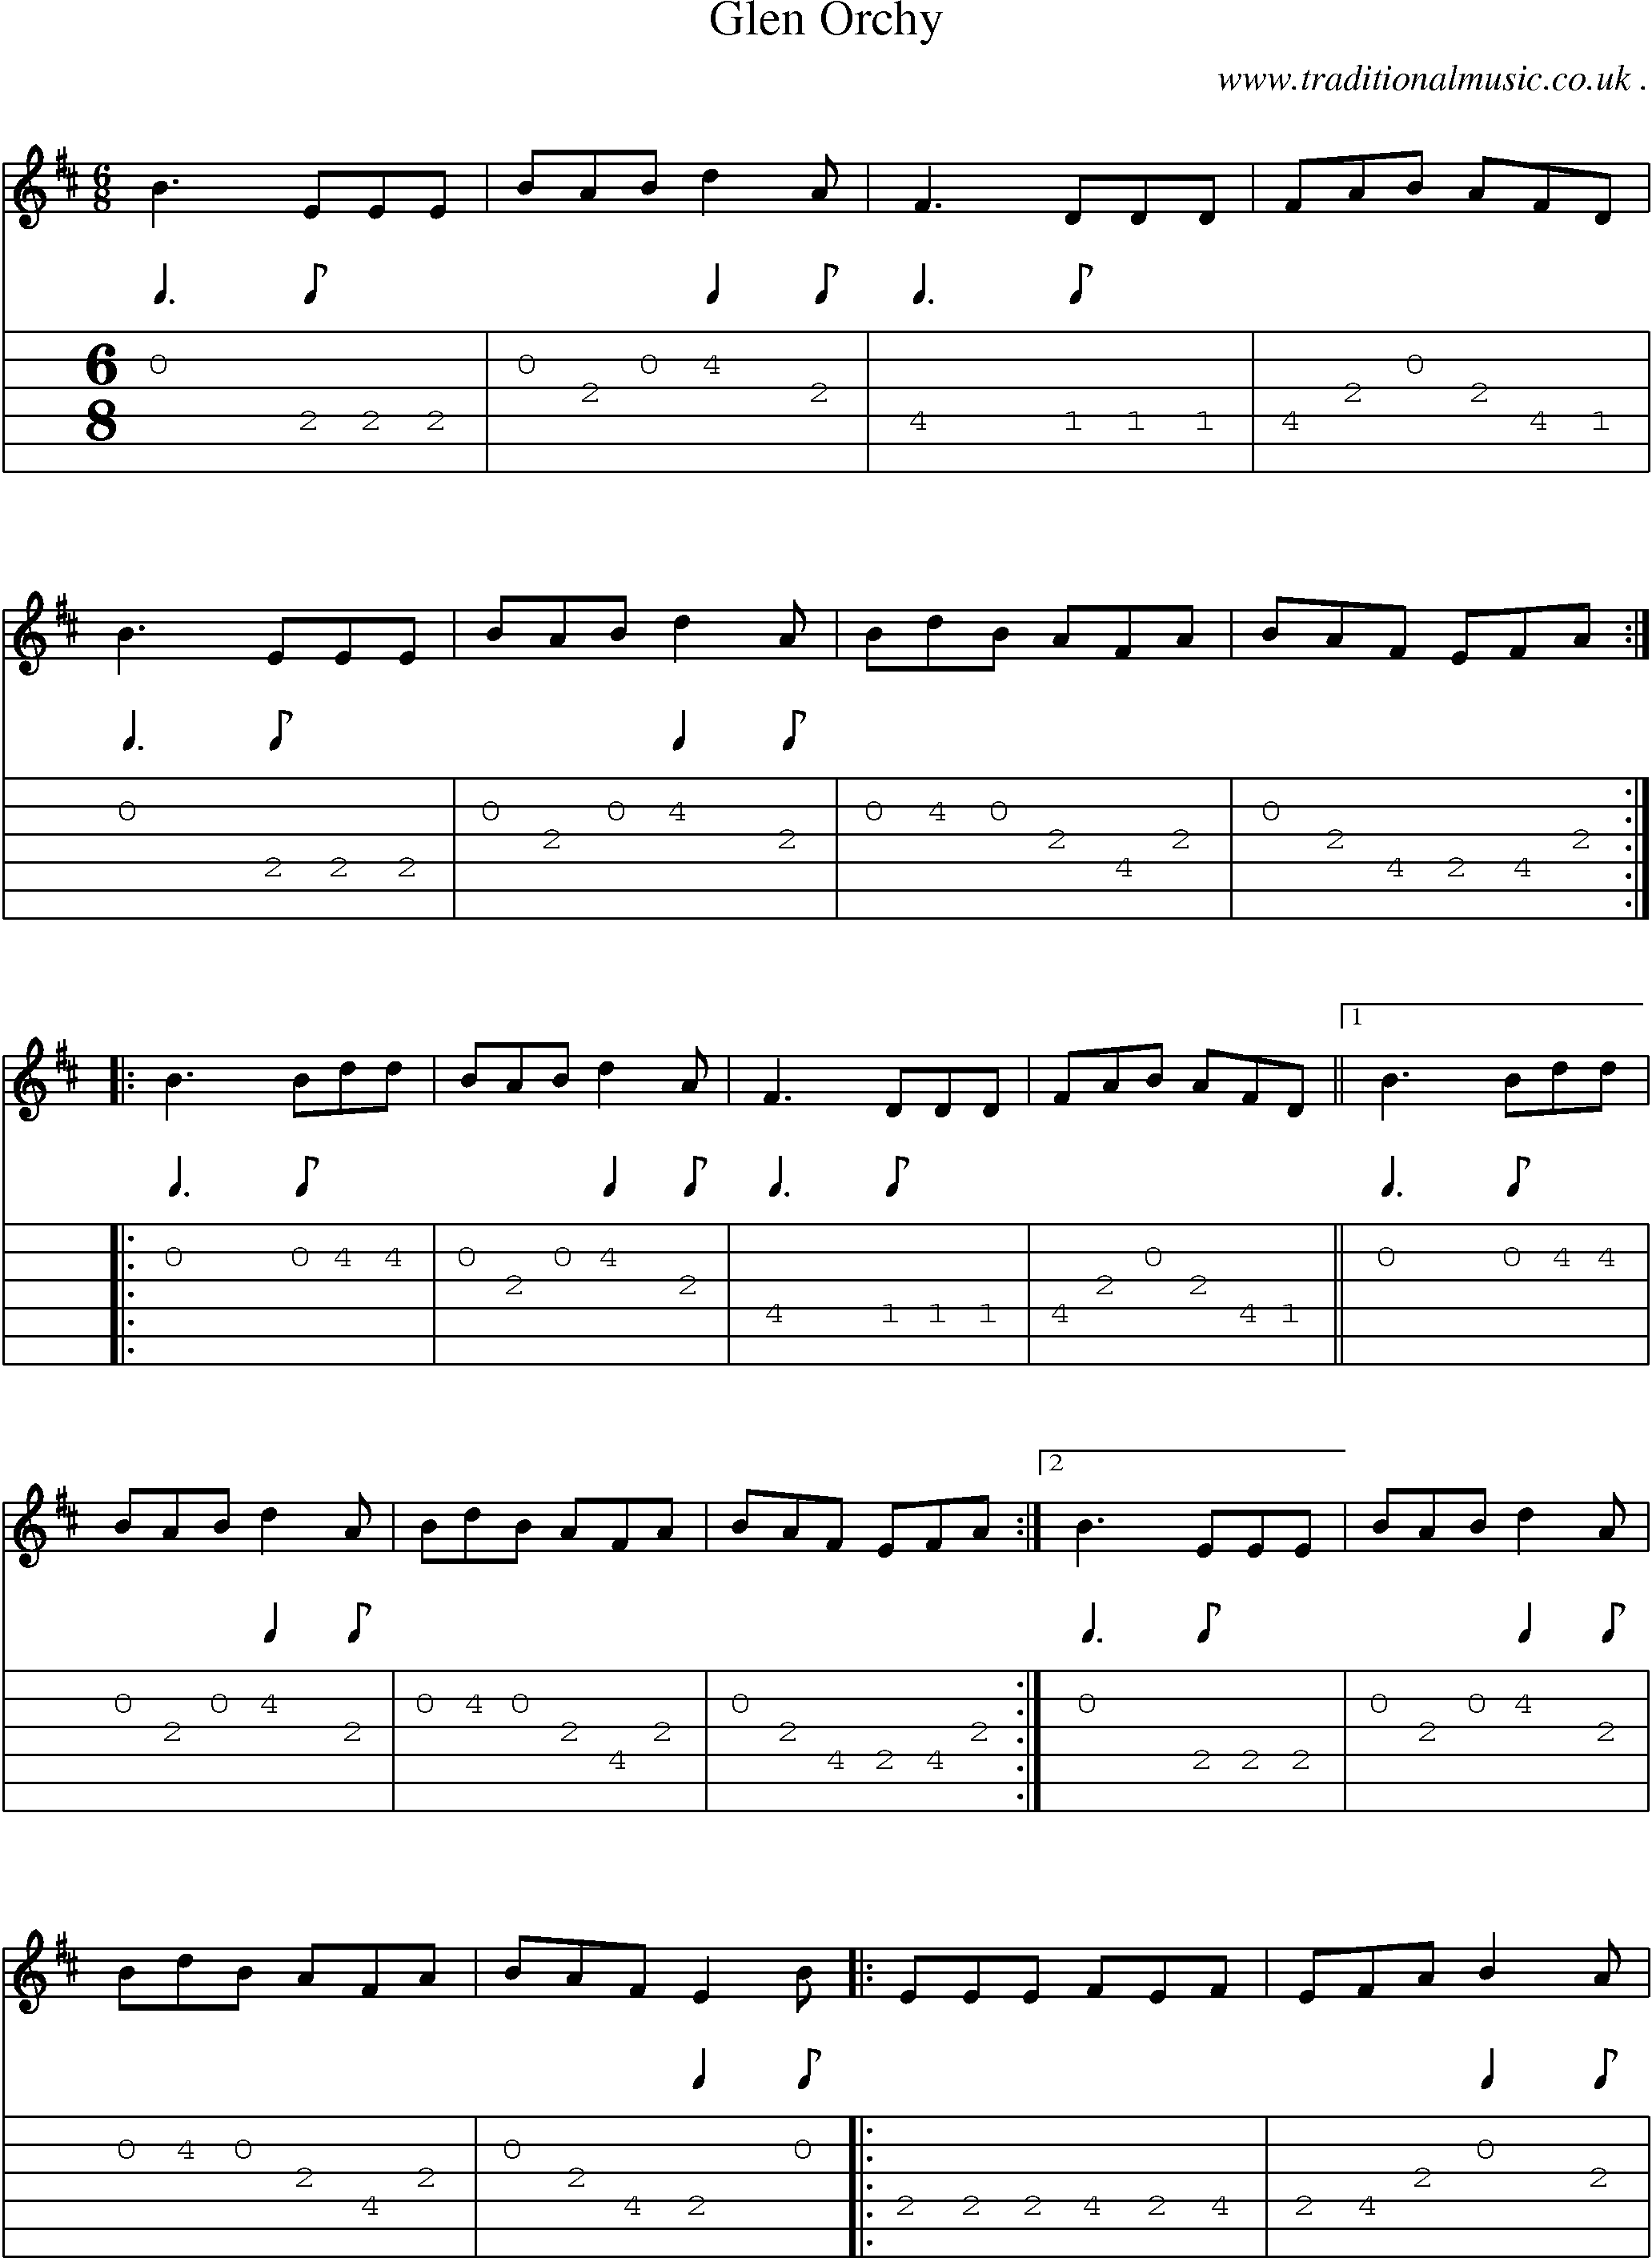 Sheet-Music and Guitar Tabs for Glen Orchy